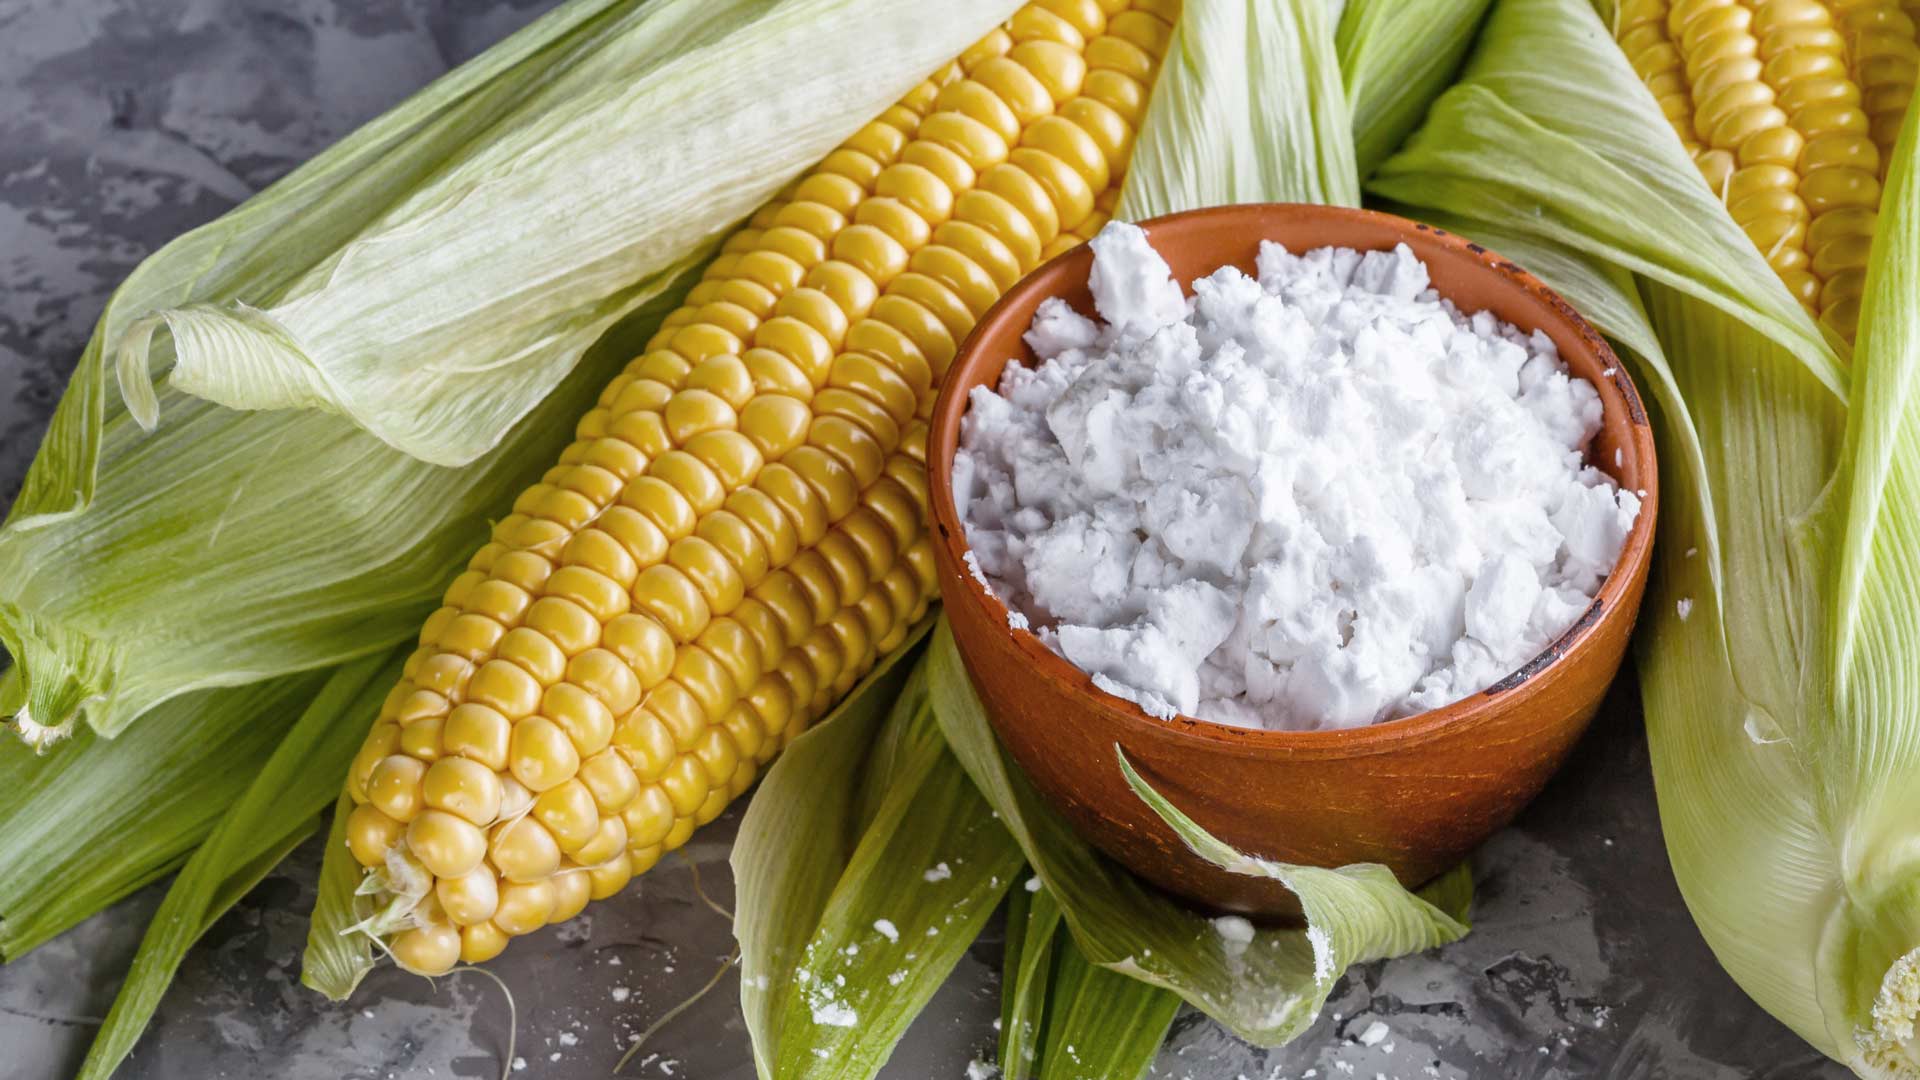 Cob of corn next to a bowl of feta cheese